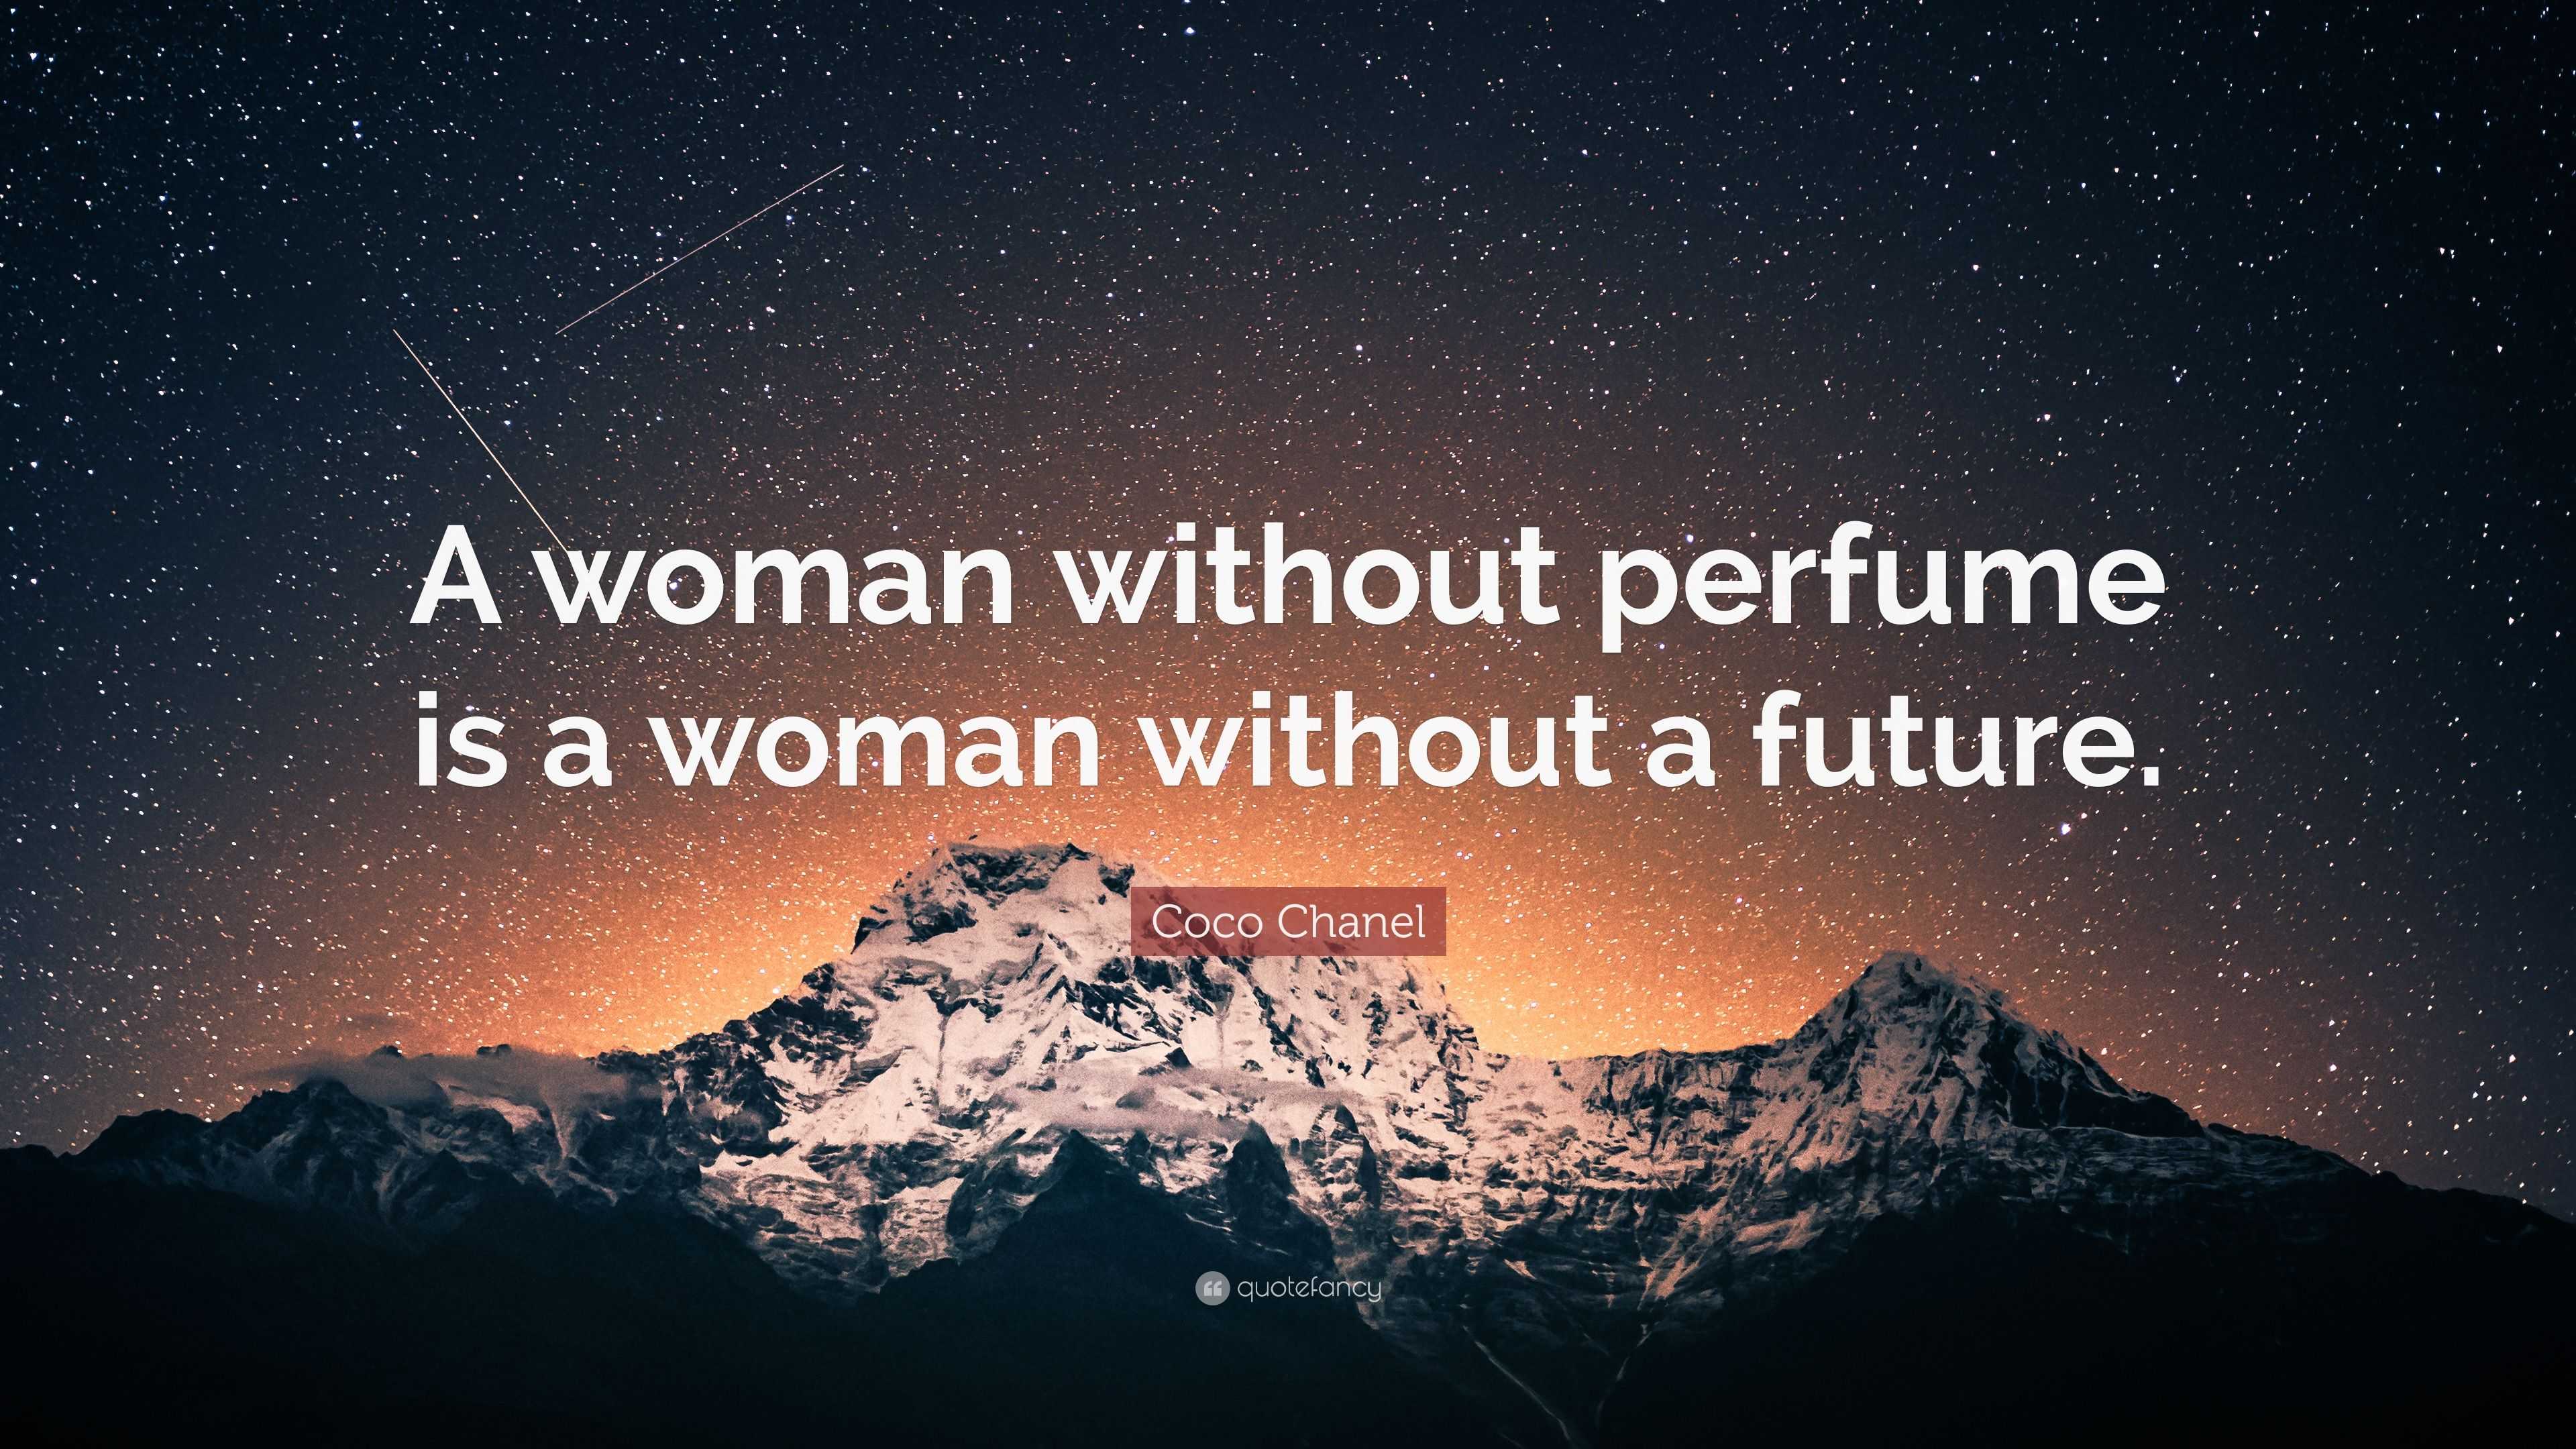 Coco Chanel Quote: “A woman without perfume is a woman without a future.”